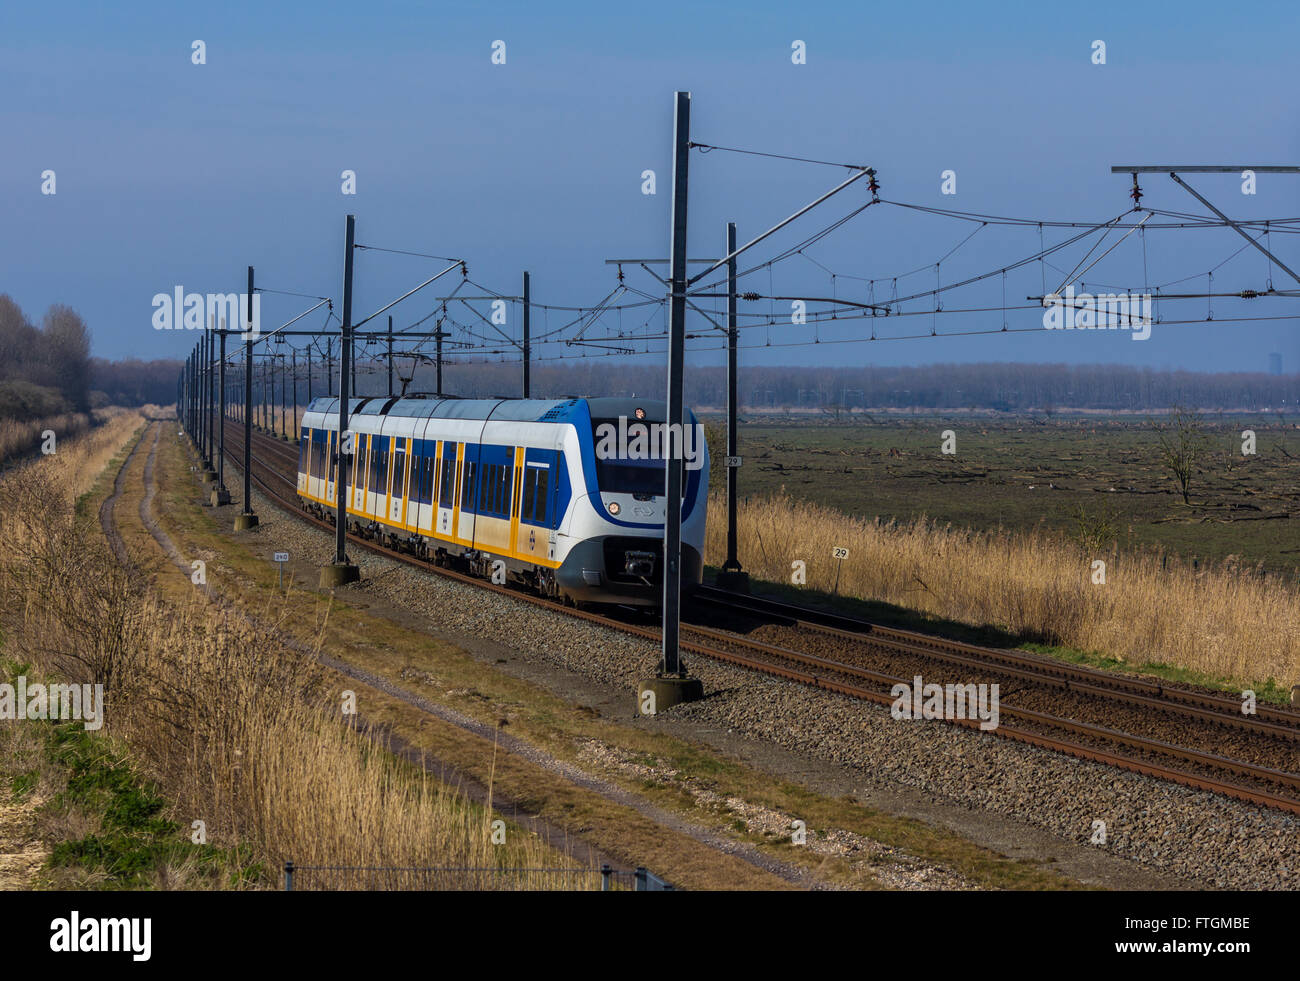 Flevoland, the Netherlands - March 26, 2016: Dutch snel train traveling through countryside. Stock Photo